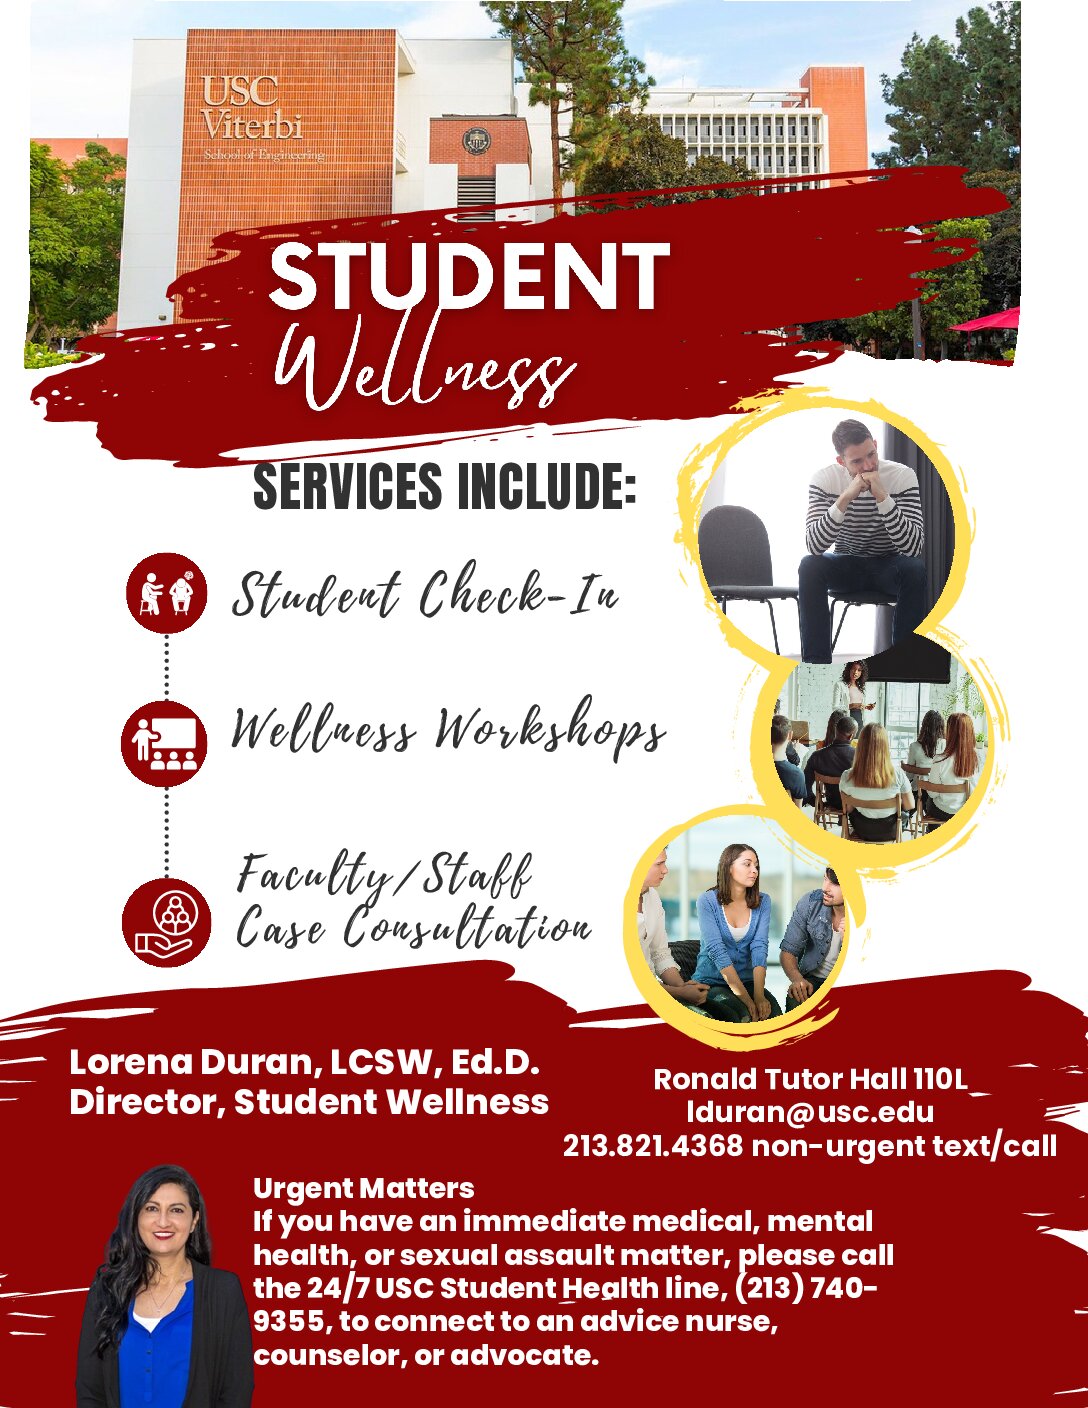 Viterbi Student Wellness flyer which includes program description and contact information.